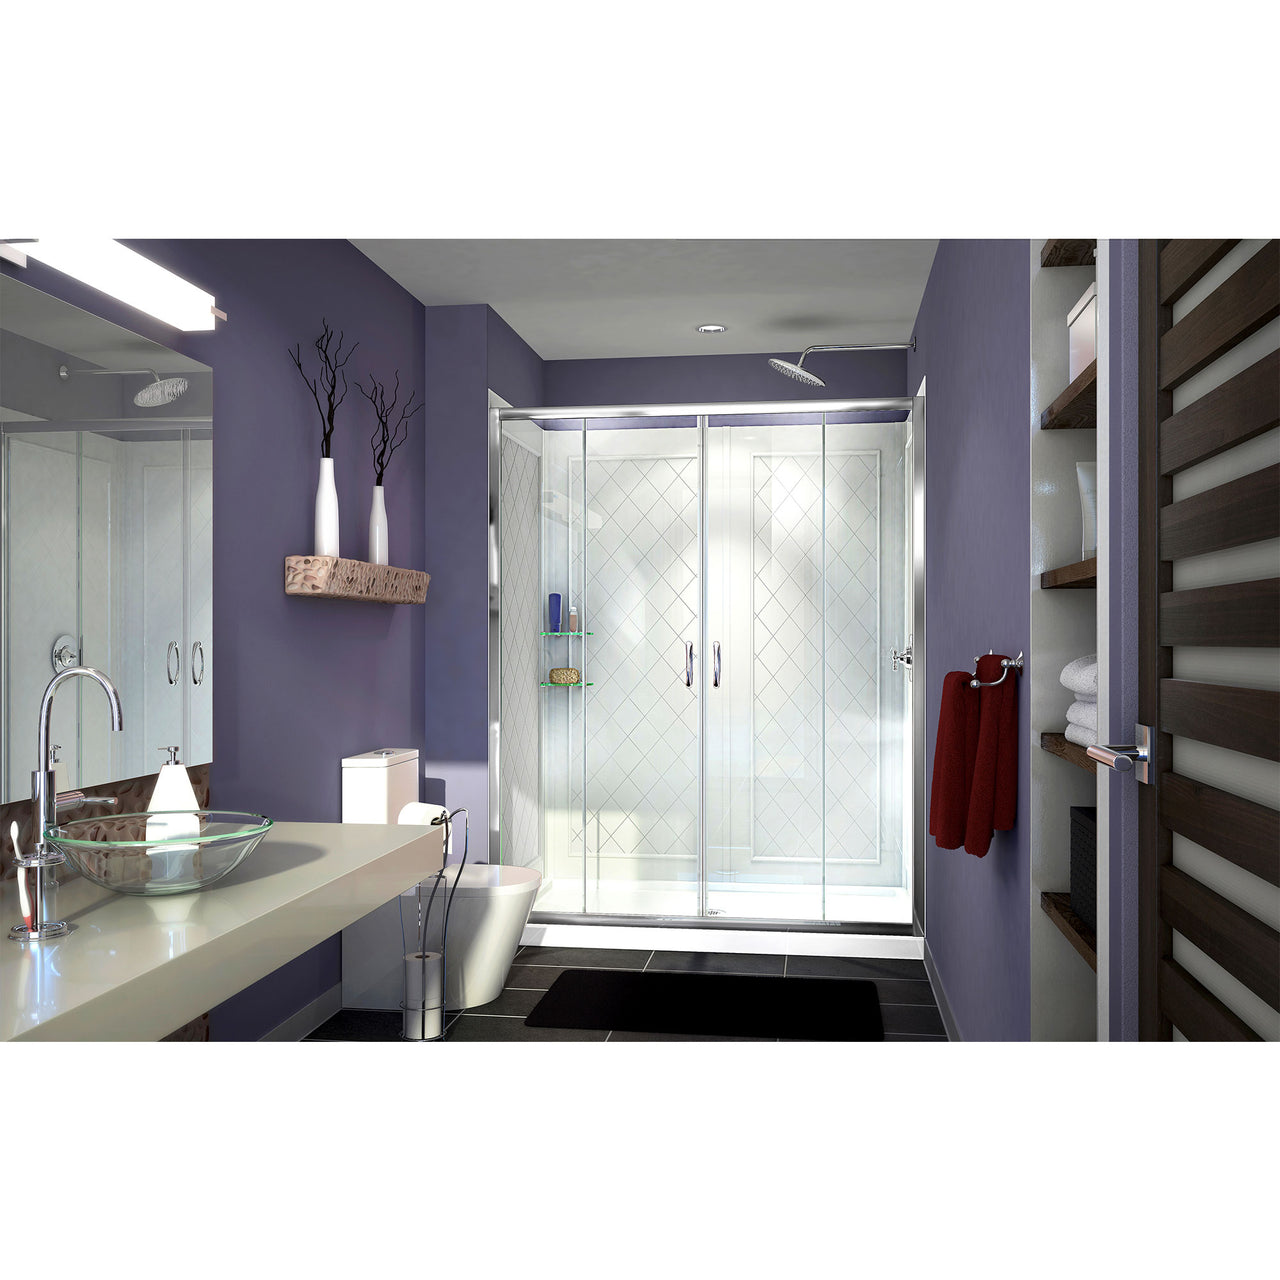 DreamLine Visions 30 in. D x 60 in. W x 76 3/4 in. H Semi-Frameless Sliding Shower Door, Shower Base and QWALL-5 Backwall Kit - BNGBath